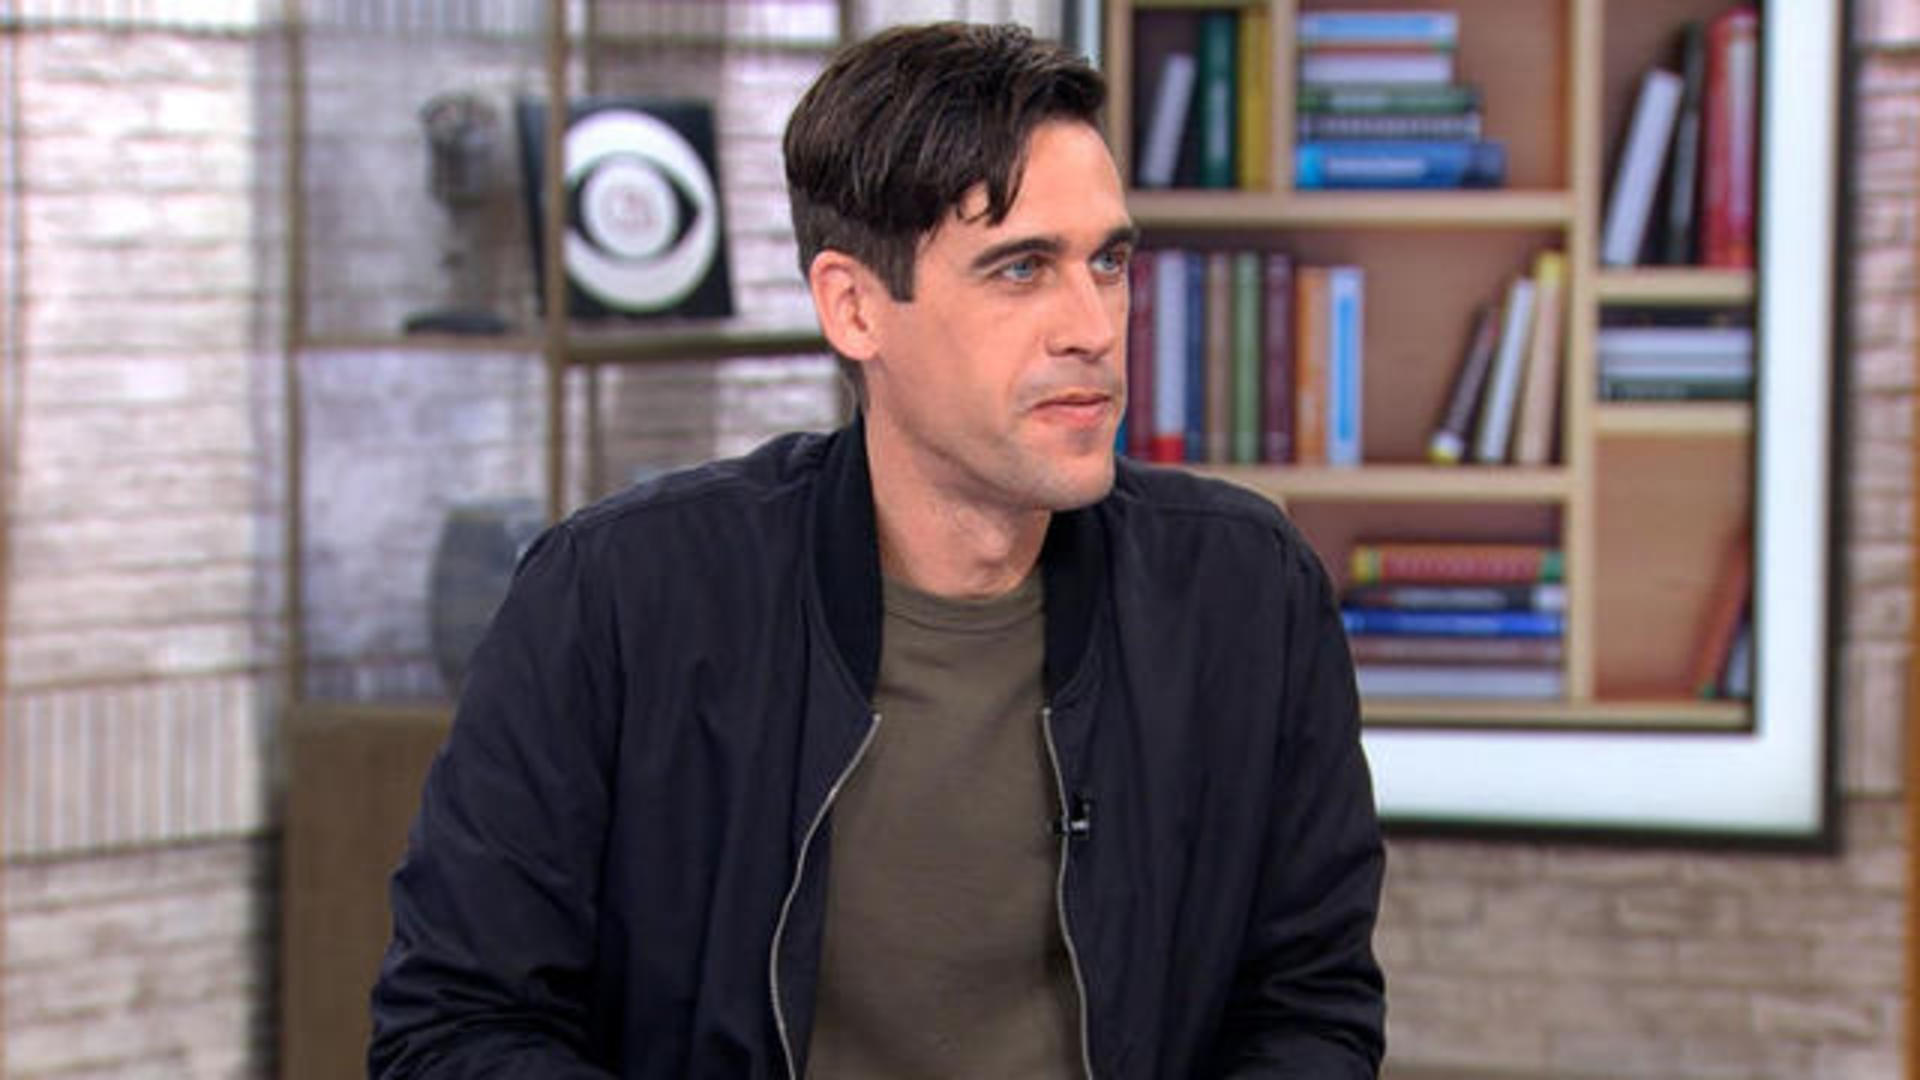 Bestselling philosopher Ryan Holiday offers advice and wisdom for parents  in new book - CBS News